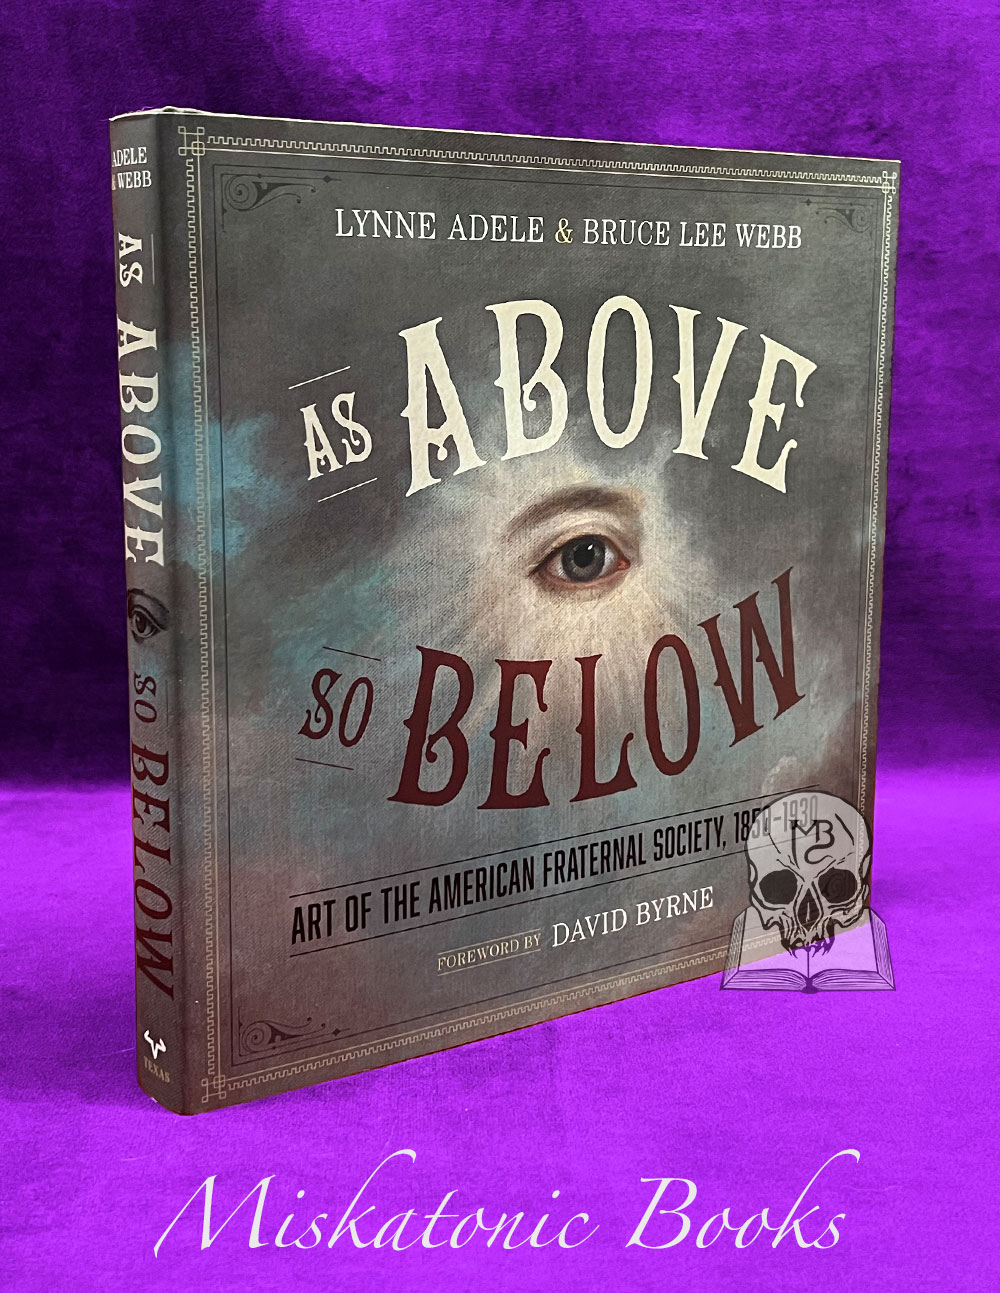 AS ABOVE SO BELOW: Art of the American Fraternal Society, 1850-1930 by Lynne Adele, Bruce Lee Webb, David Byrne - First Edition Hardcover